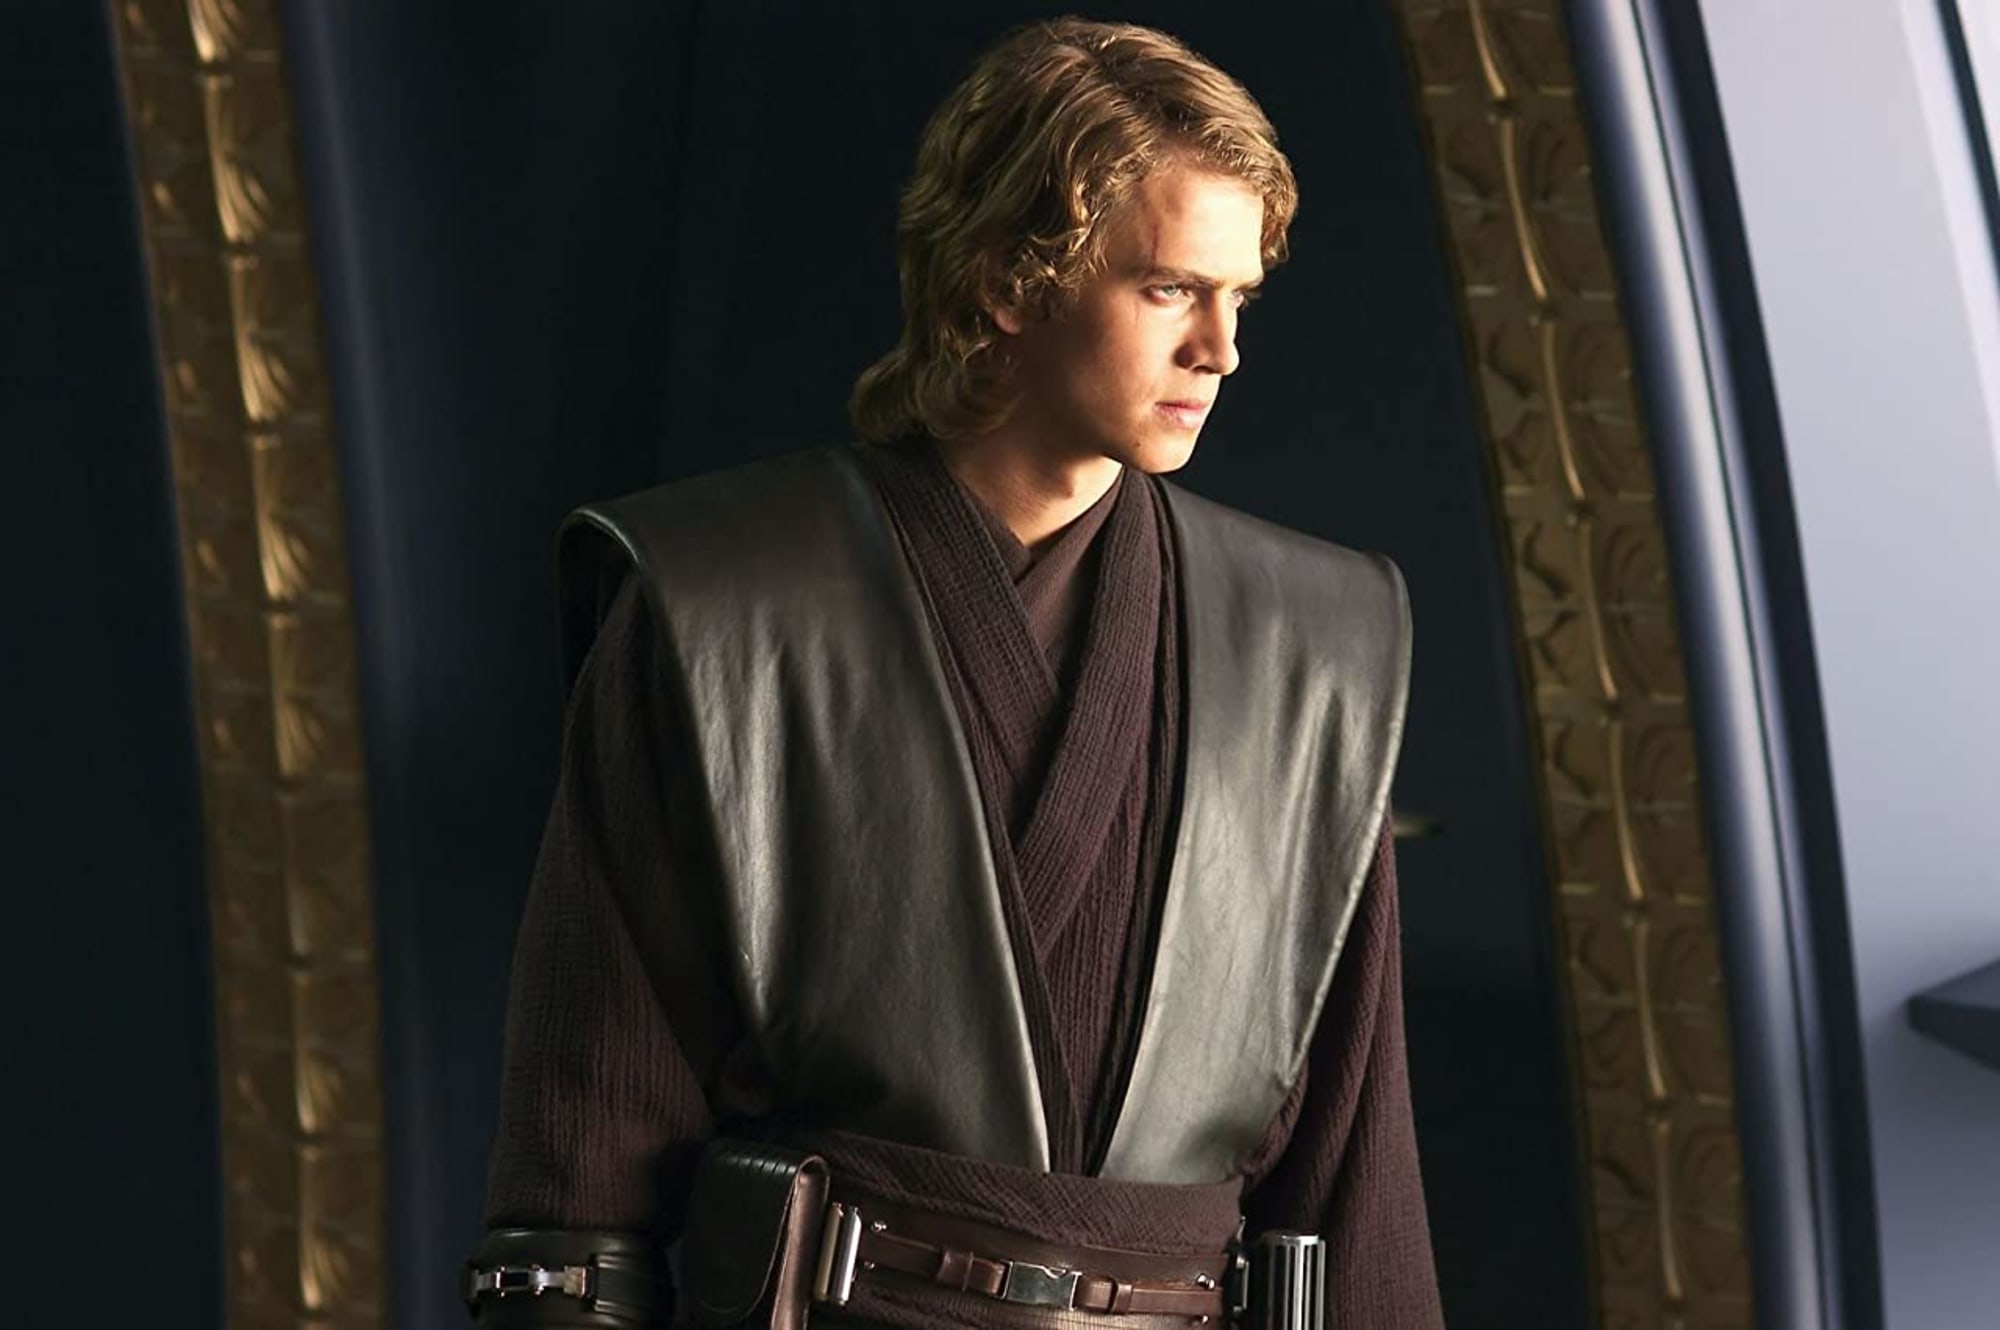 Star Wars Anakin Skywalker Predicted His Own Fate In Revenge Of The Sith